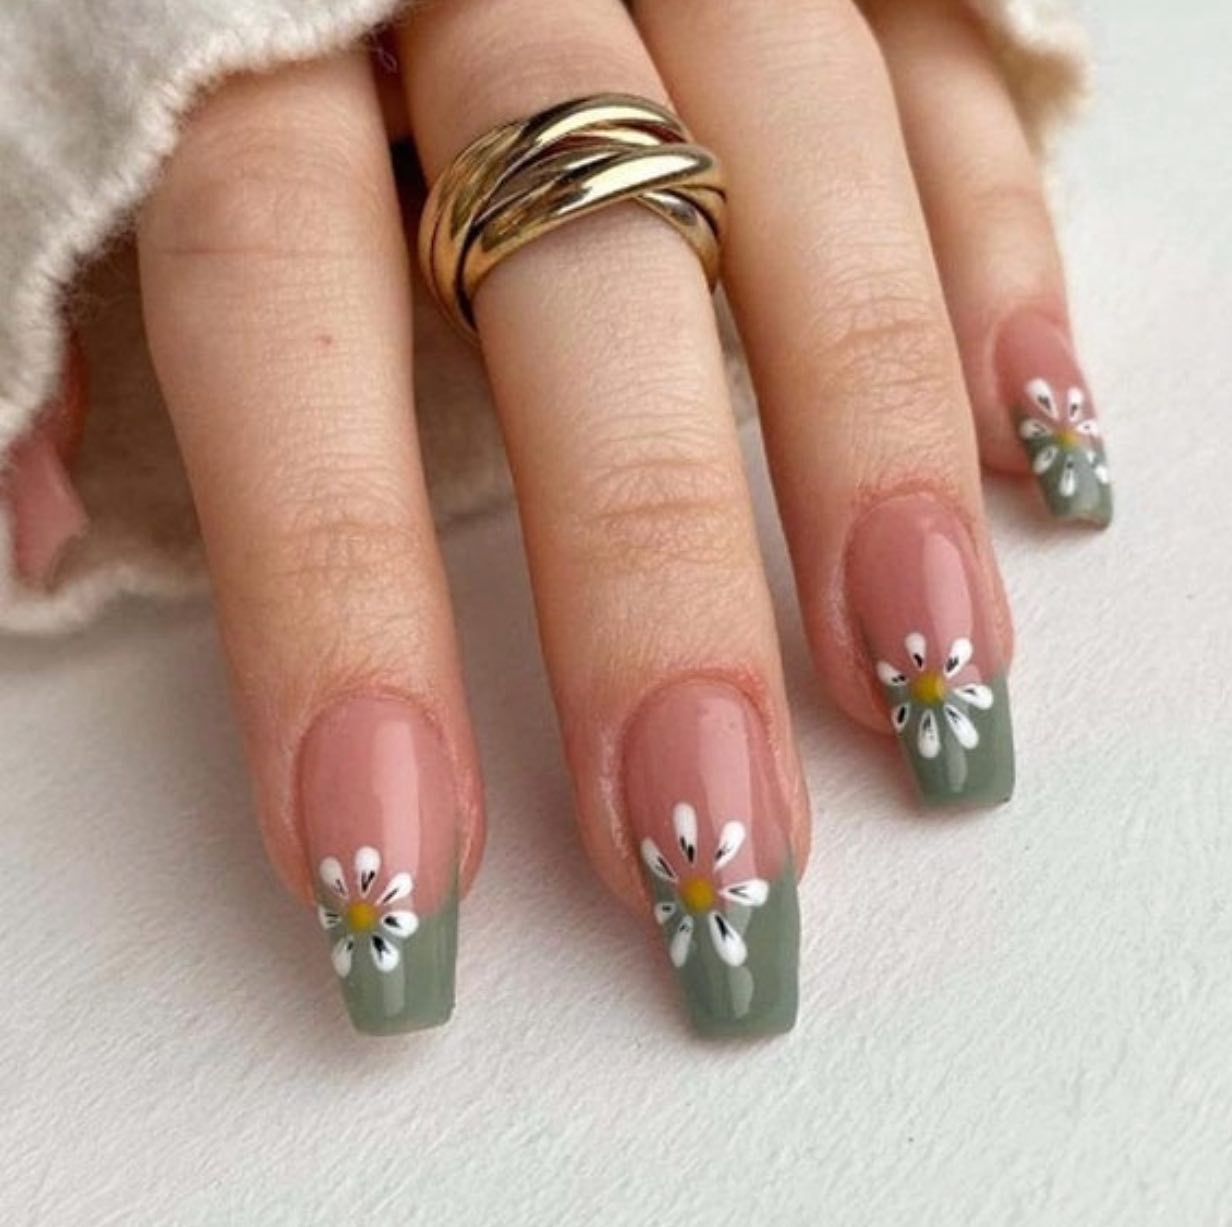 Pastel green with french tips is here to show everyone that you have a good taste. These daises give it a cute look.